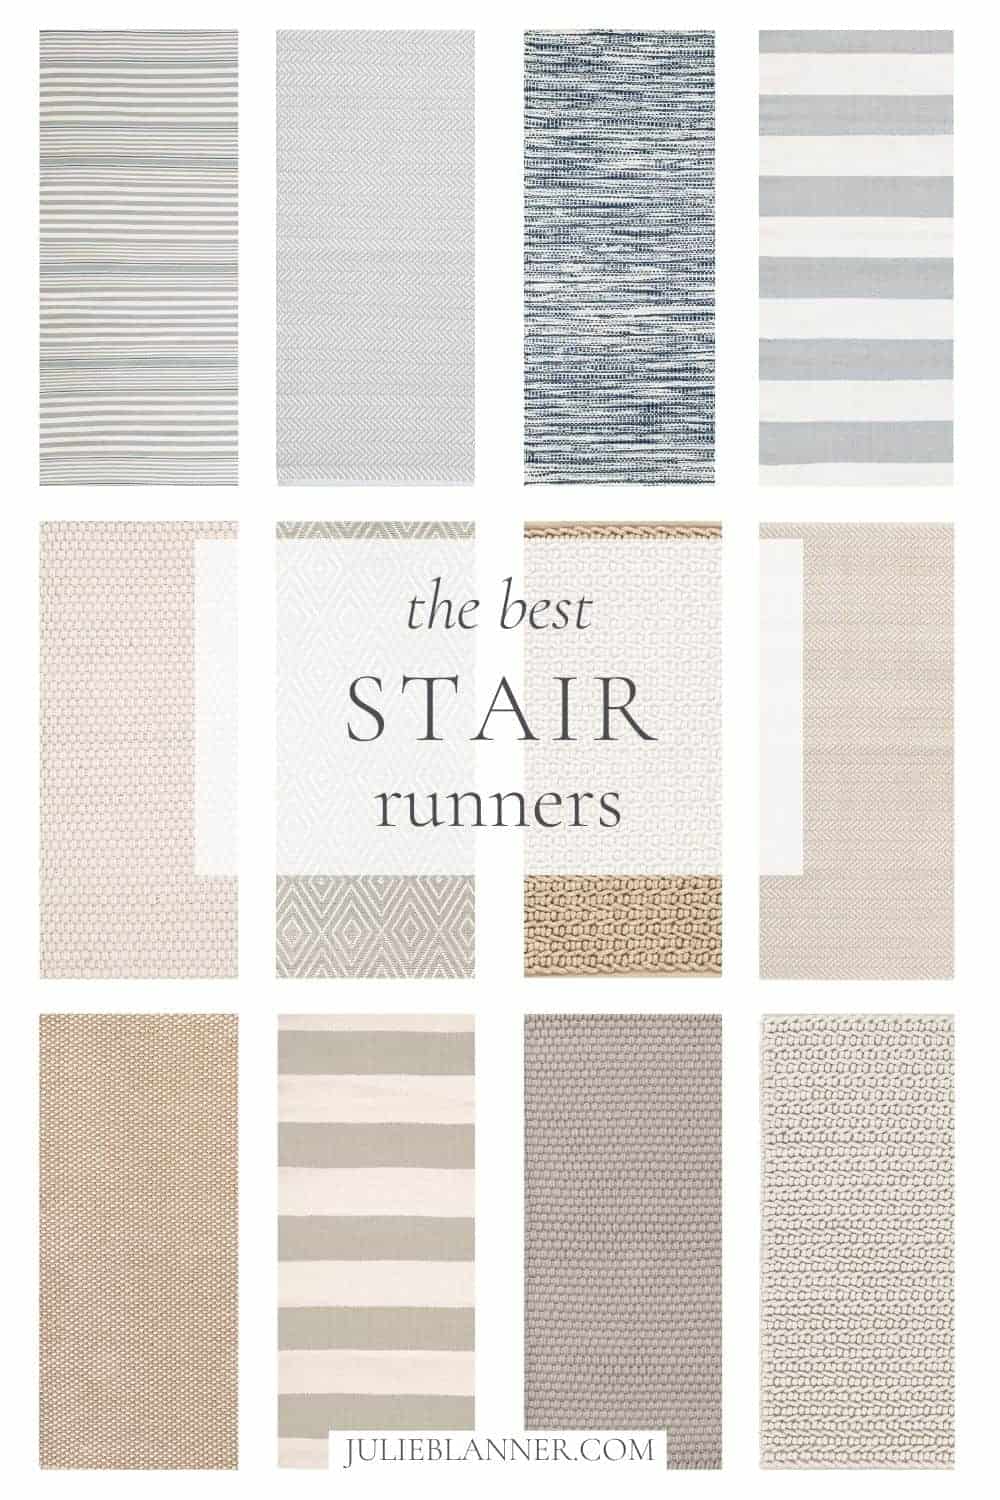 collage of stair runners with text overlay